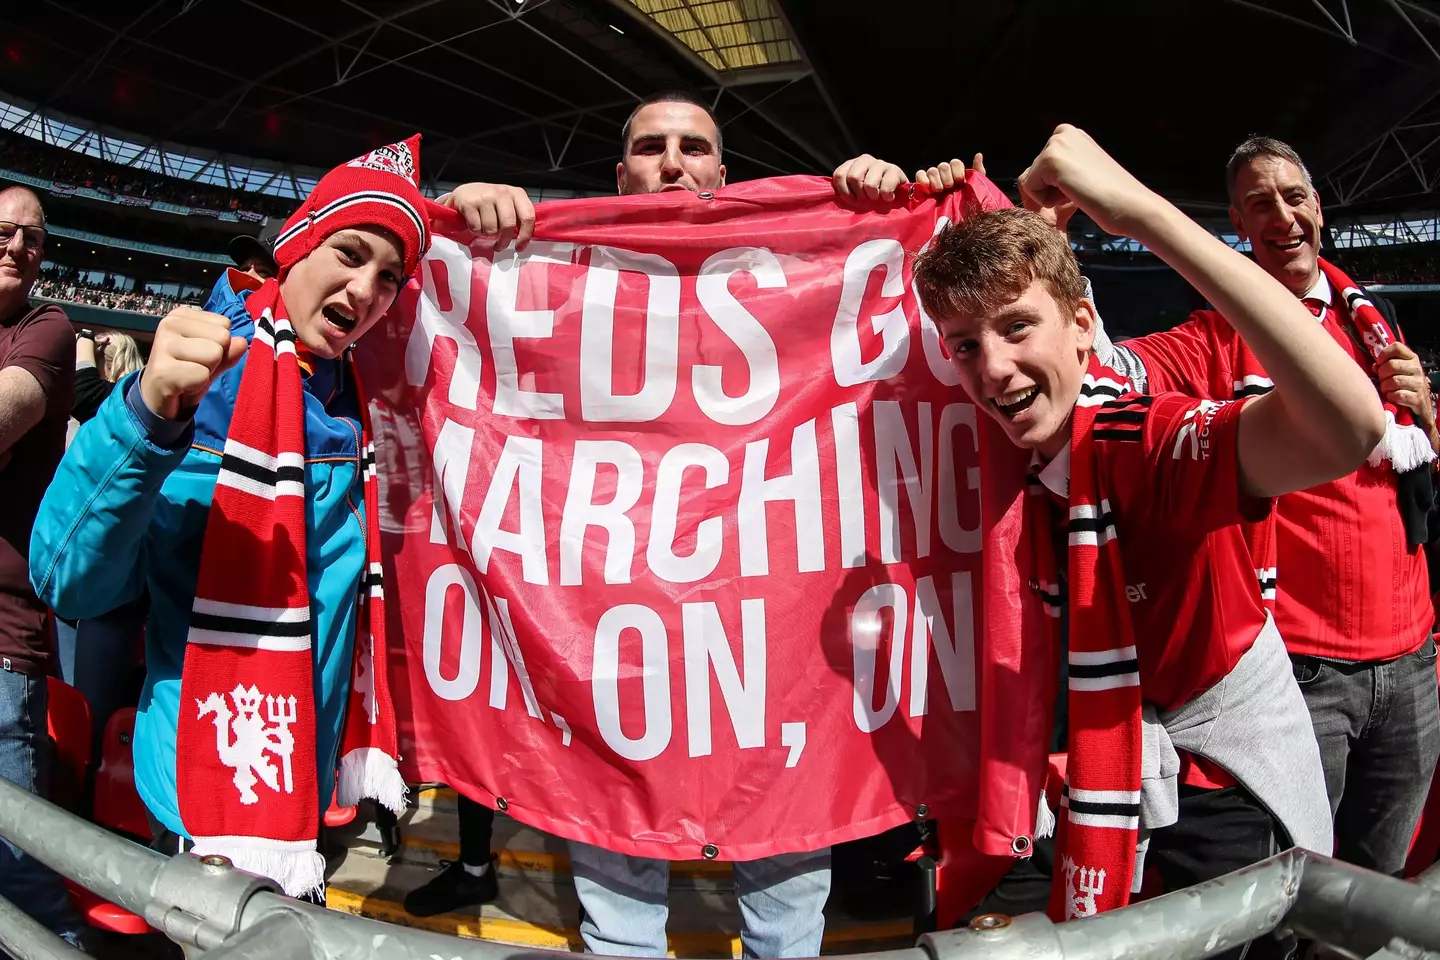 The majority of supporters are expected to travel down from Manchester.